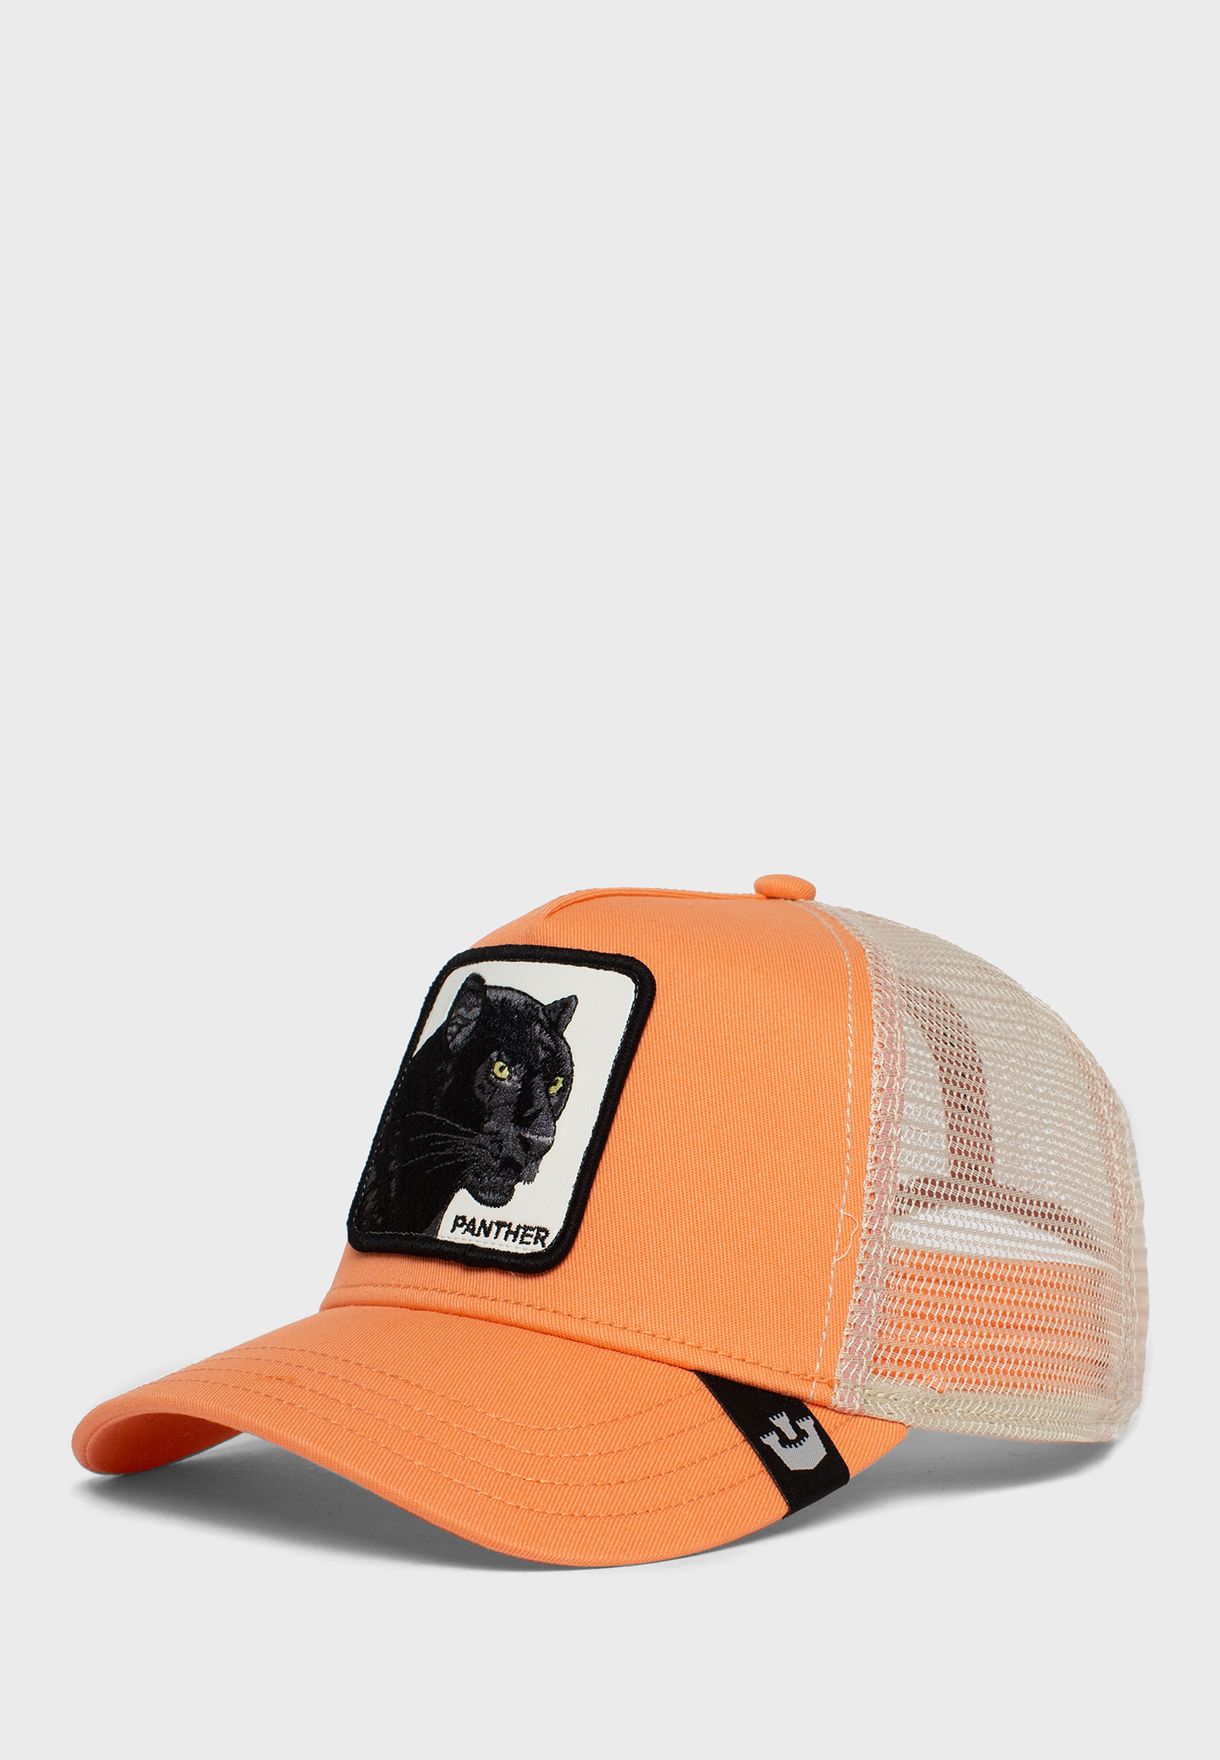 The Panther Curved Peak Cap